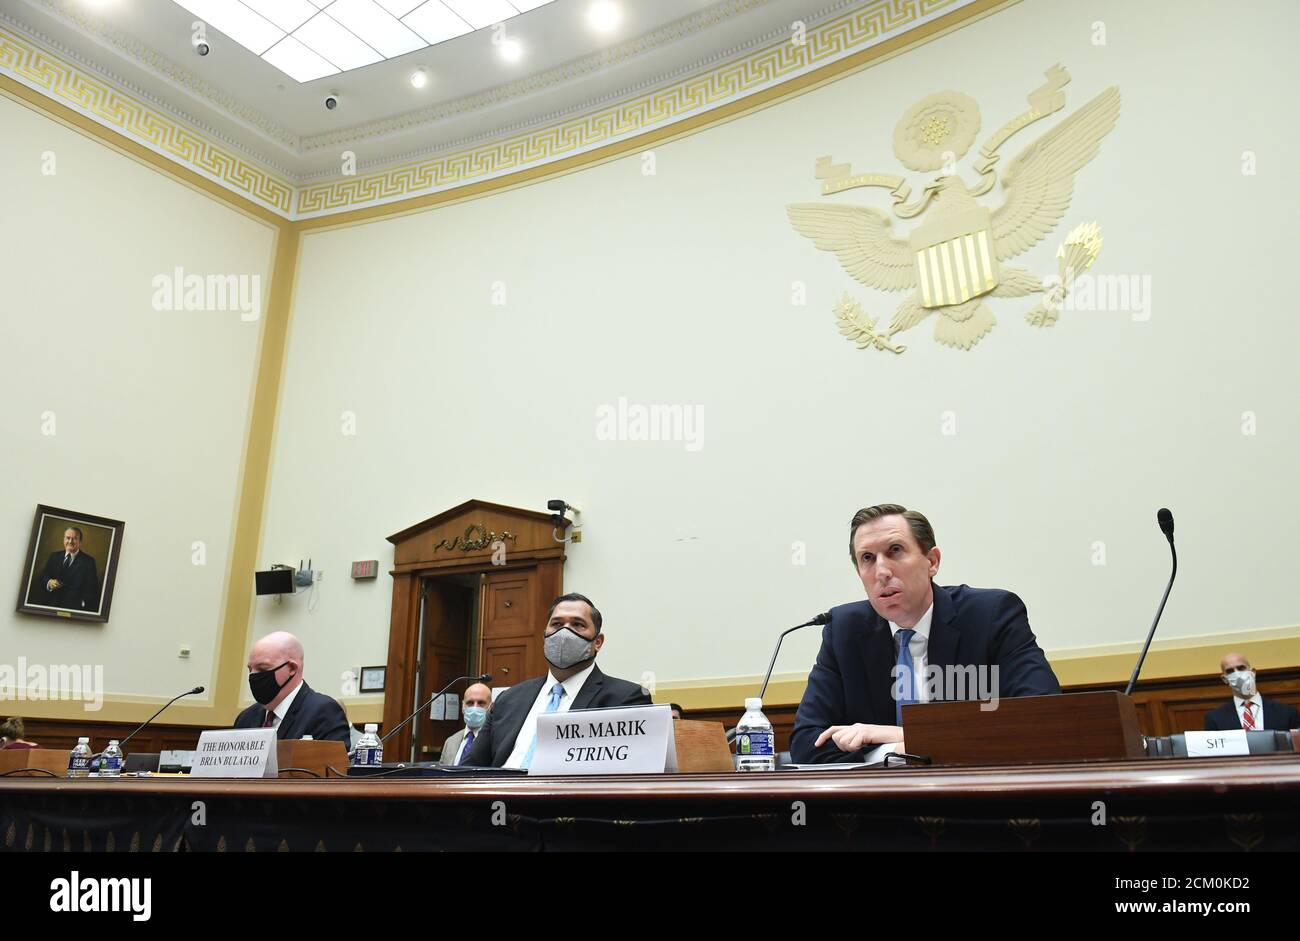 Marik String (R), Acting Legal Adviser for the State Department, testifies with R. Clarke Cooper (L), Assistant Secretary of State for Political-Military Affairs, and Brian Bulatao, Under Secretary of State for Management, during a House Committee on Foreign Affairs hearing looking into the firing of State Department Inspector General Steven Linick, on Capitol Hill in Washington, DC on Wednesday, September 16, 2020. Credit: Kevin Dietsch/Pool via CNP | usage worldwide Stock Photo